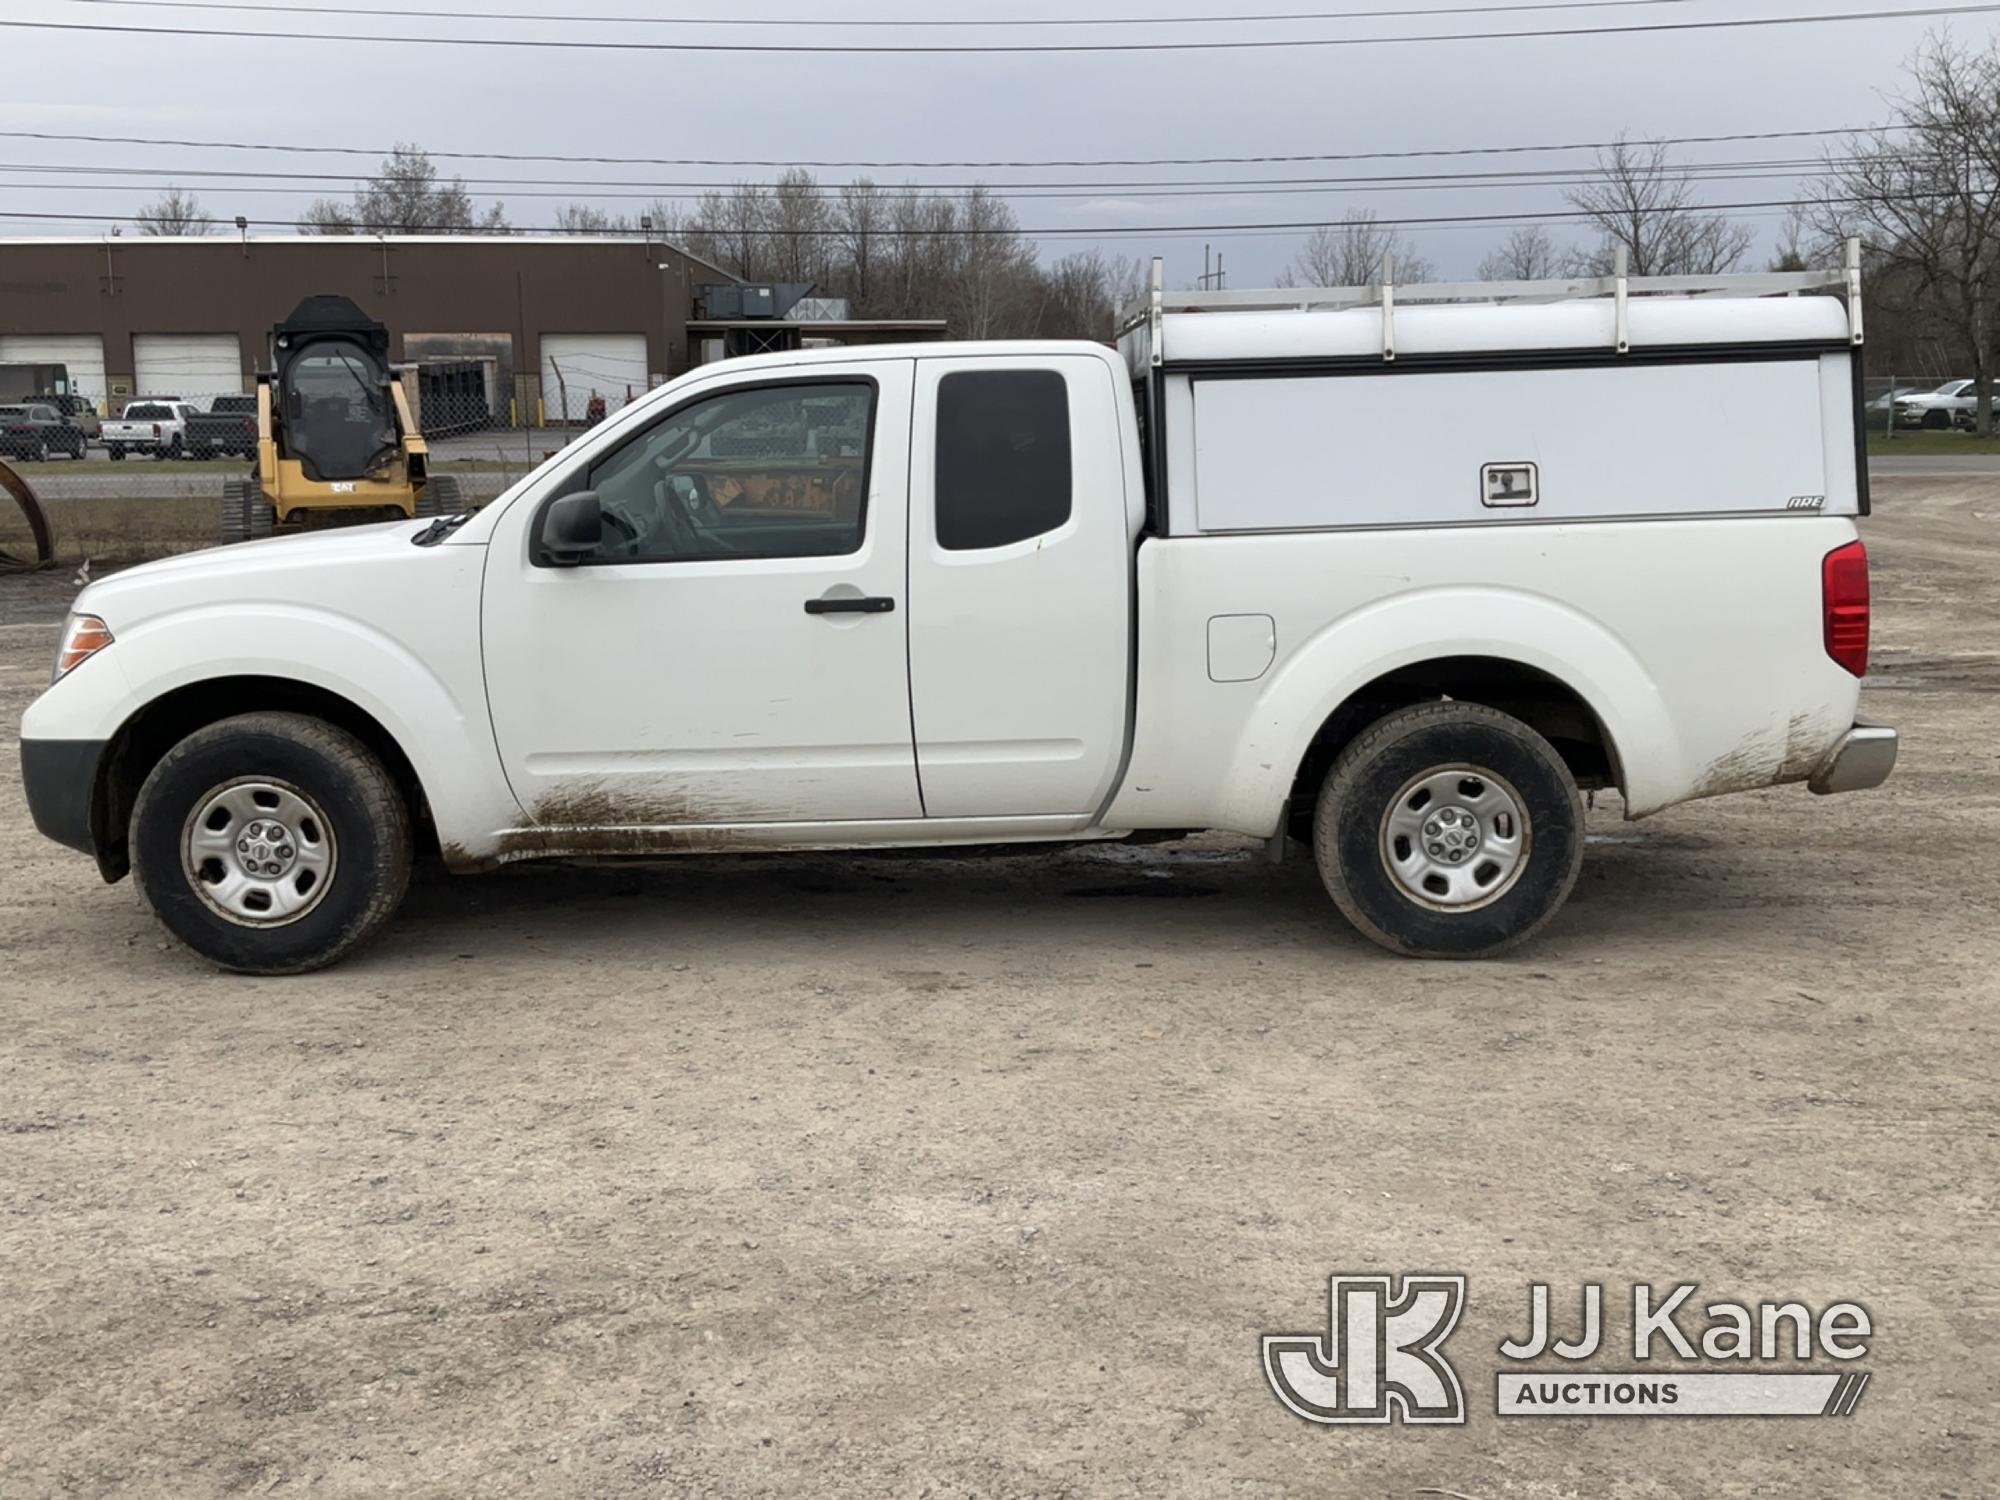 (Rome, NY) 2016 Nissan Frontier Extended-Cab Pickup Truck Runs & Moves, Body & Rust Damage